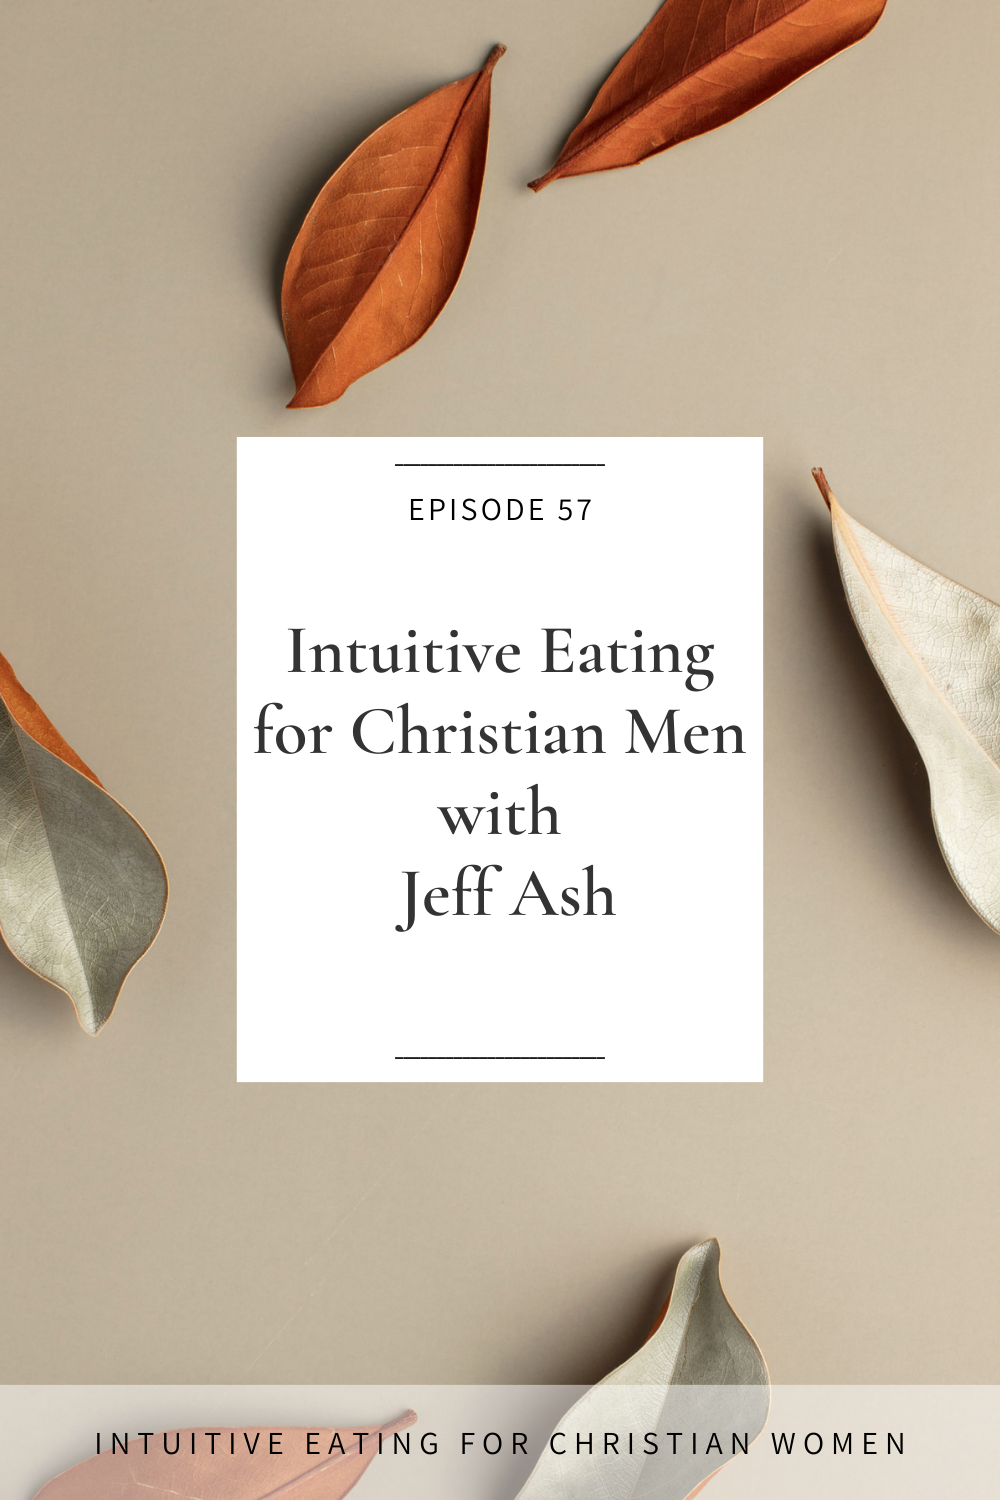 On episode 57 of the Intuitive Eating for Christian Women podcast our guest Jeff Ash shares his journey with food and faith, and gives us a male perspective on intuitive eating and how it relates to our faith as Christians.